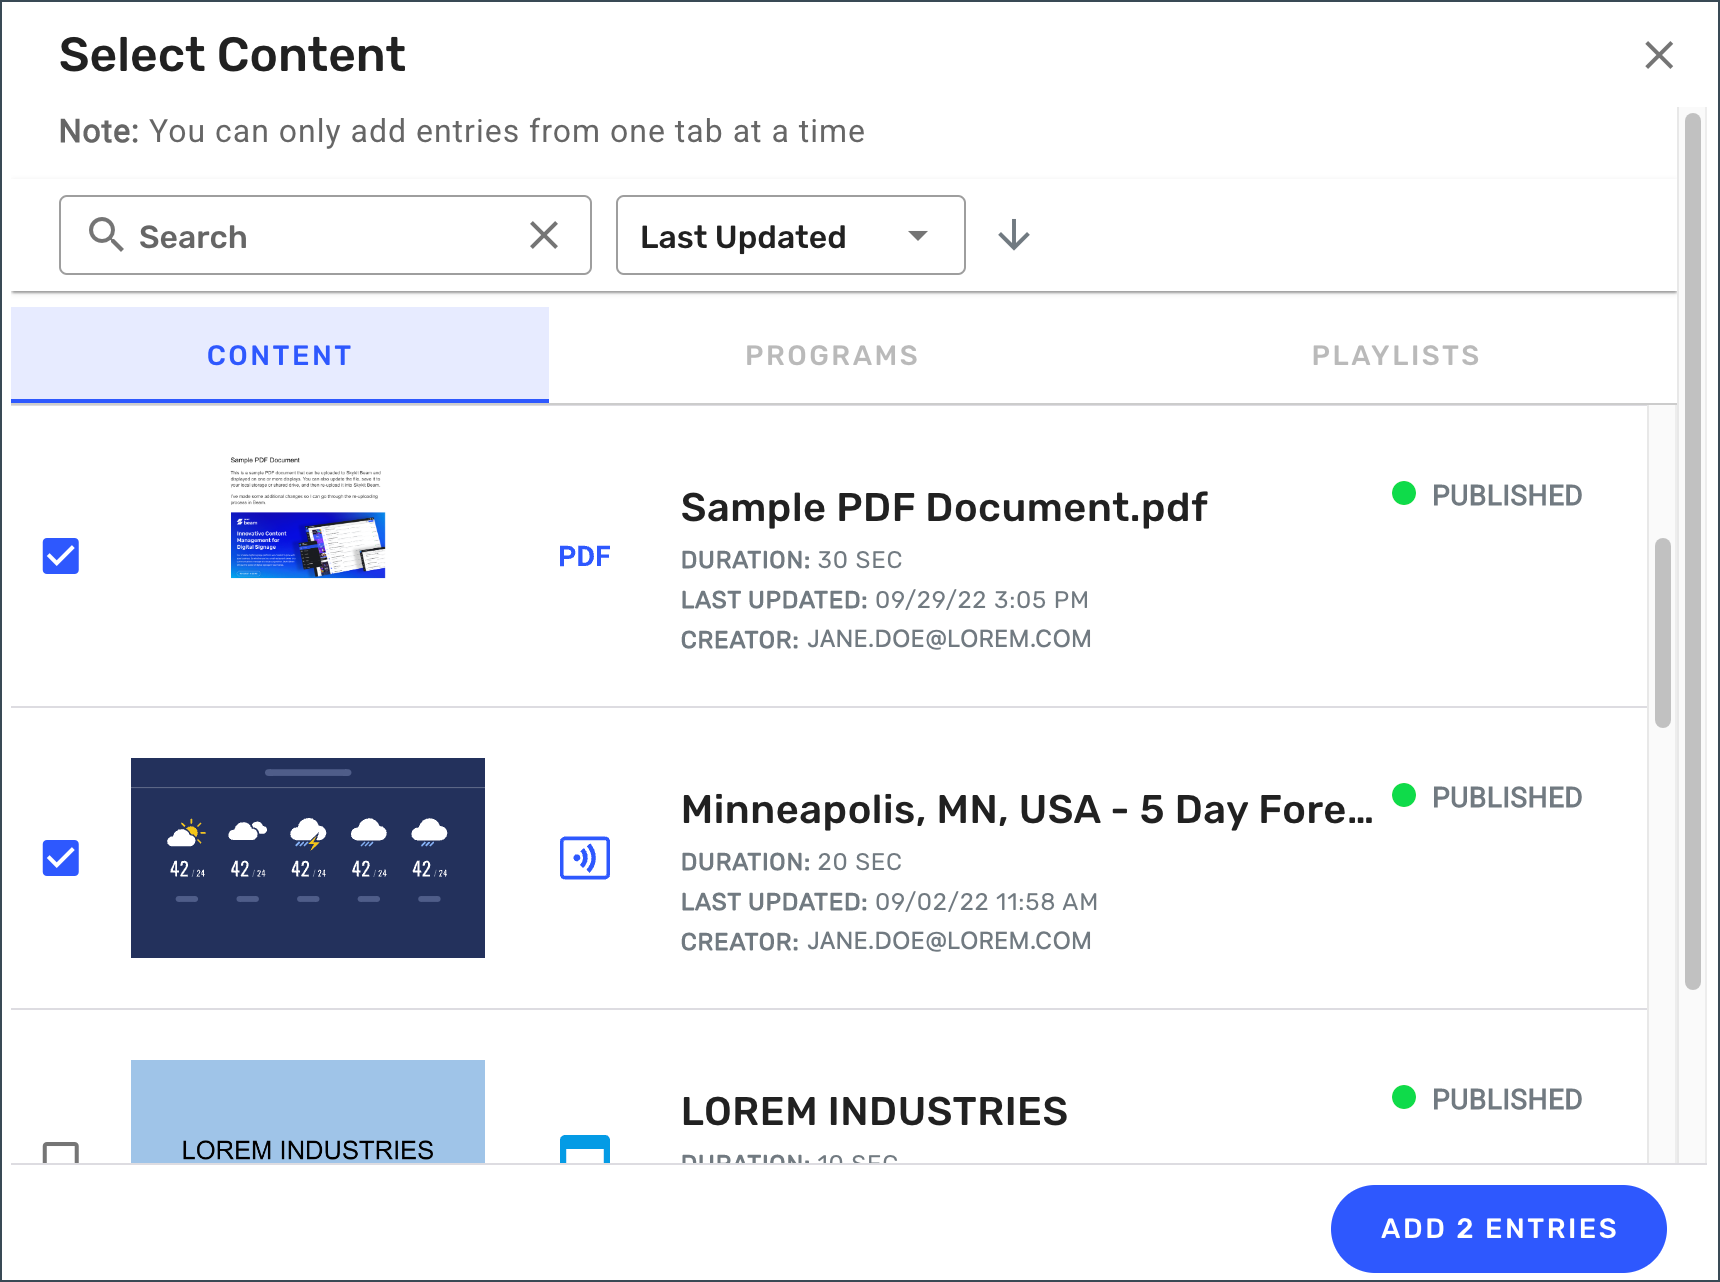 Select Content window - content items selected